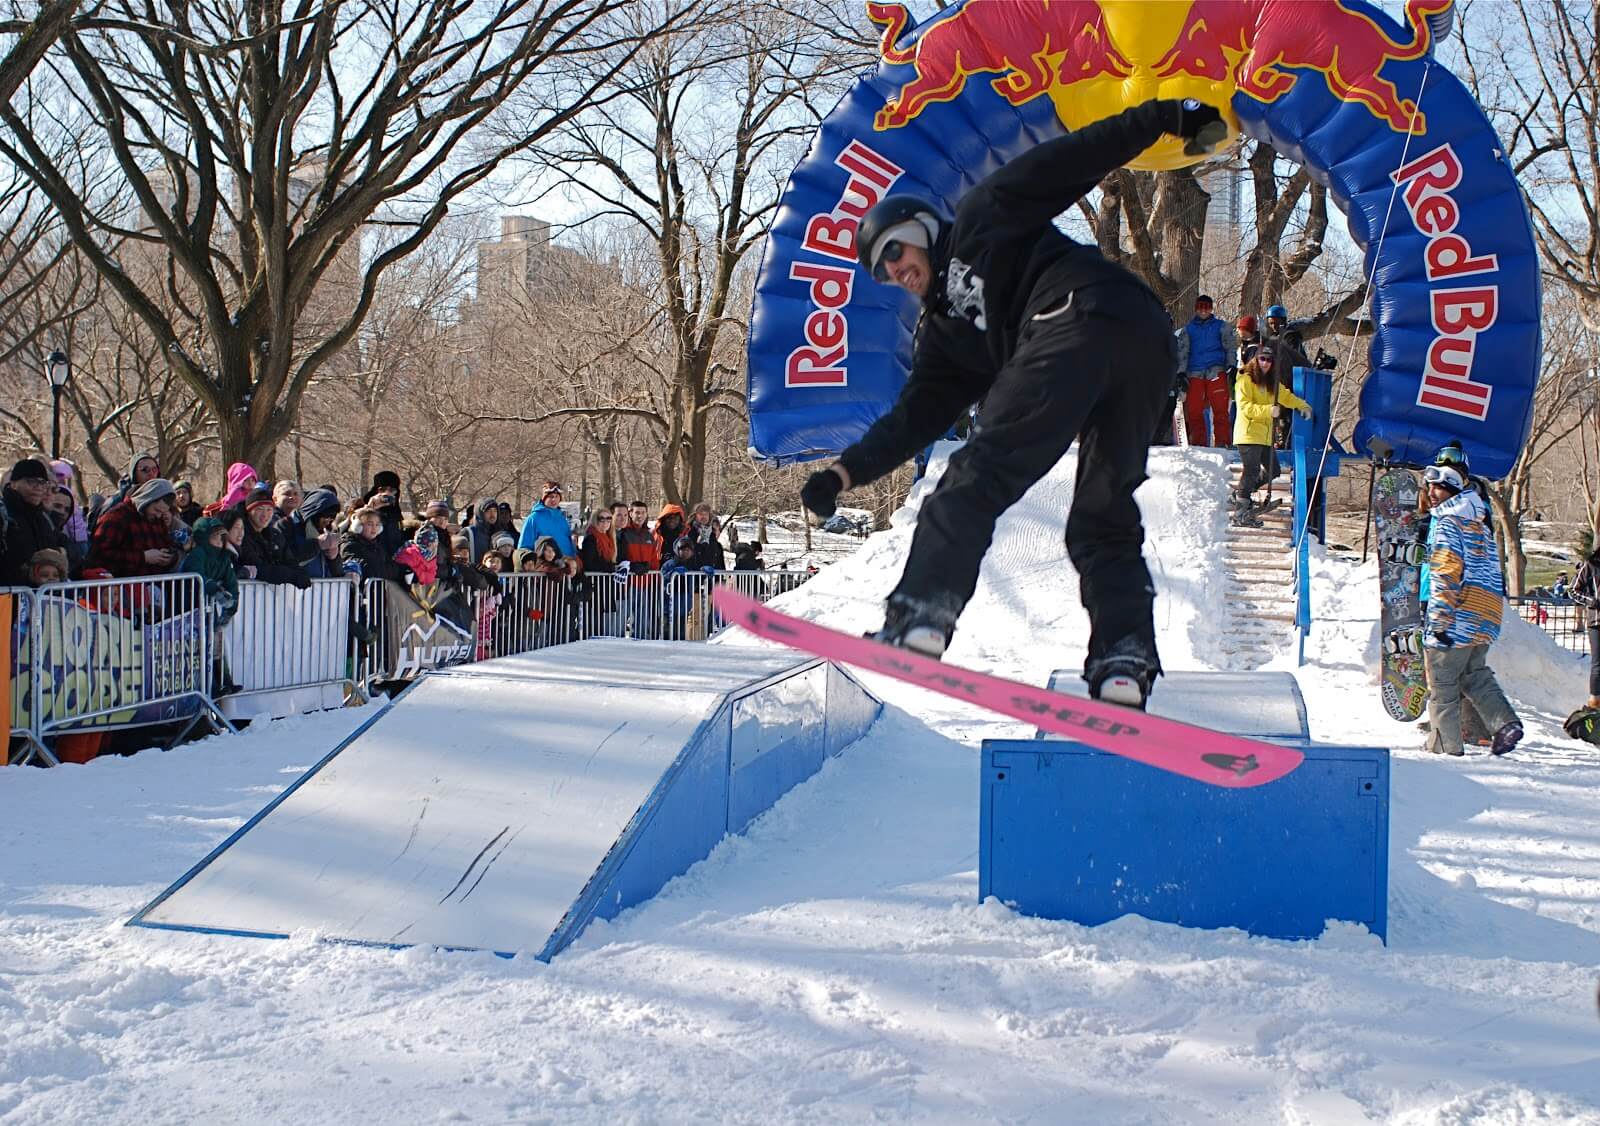 Winter Jam At Central Park: things to do in New York in January 2022